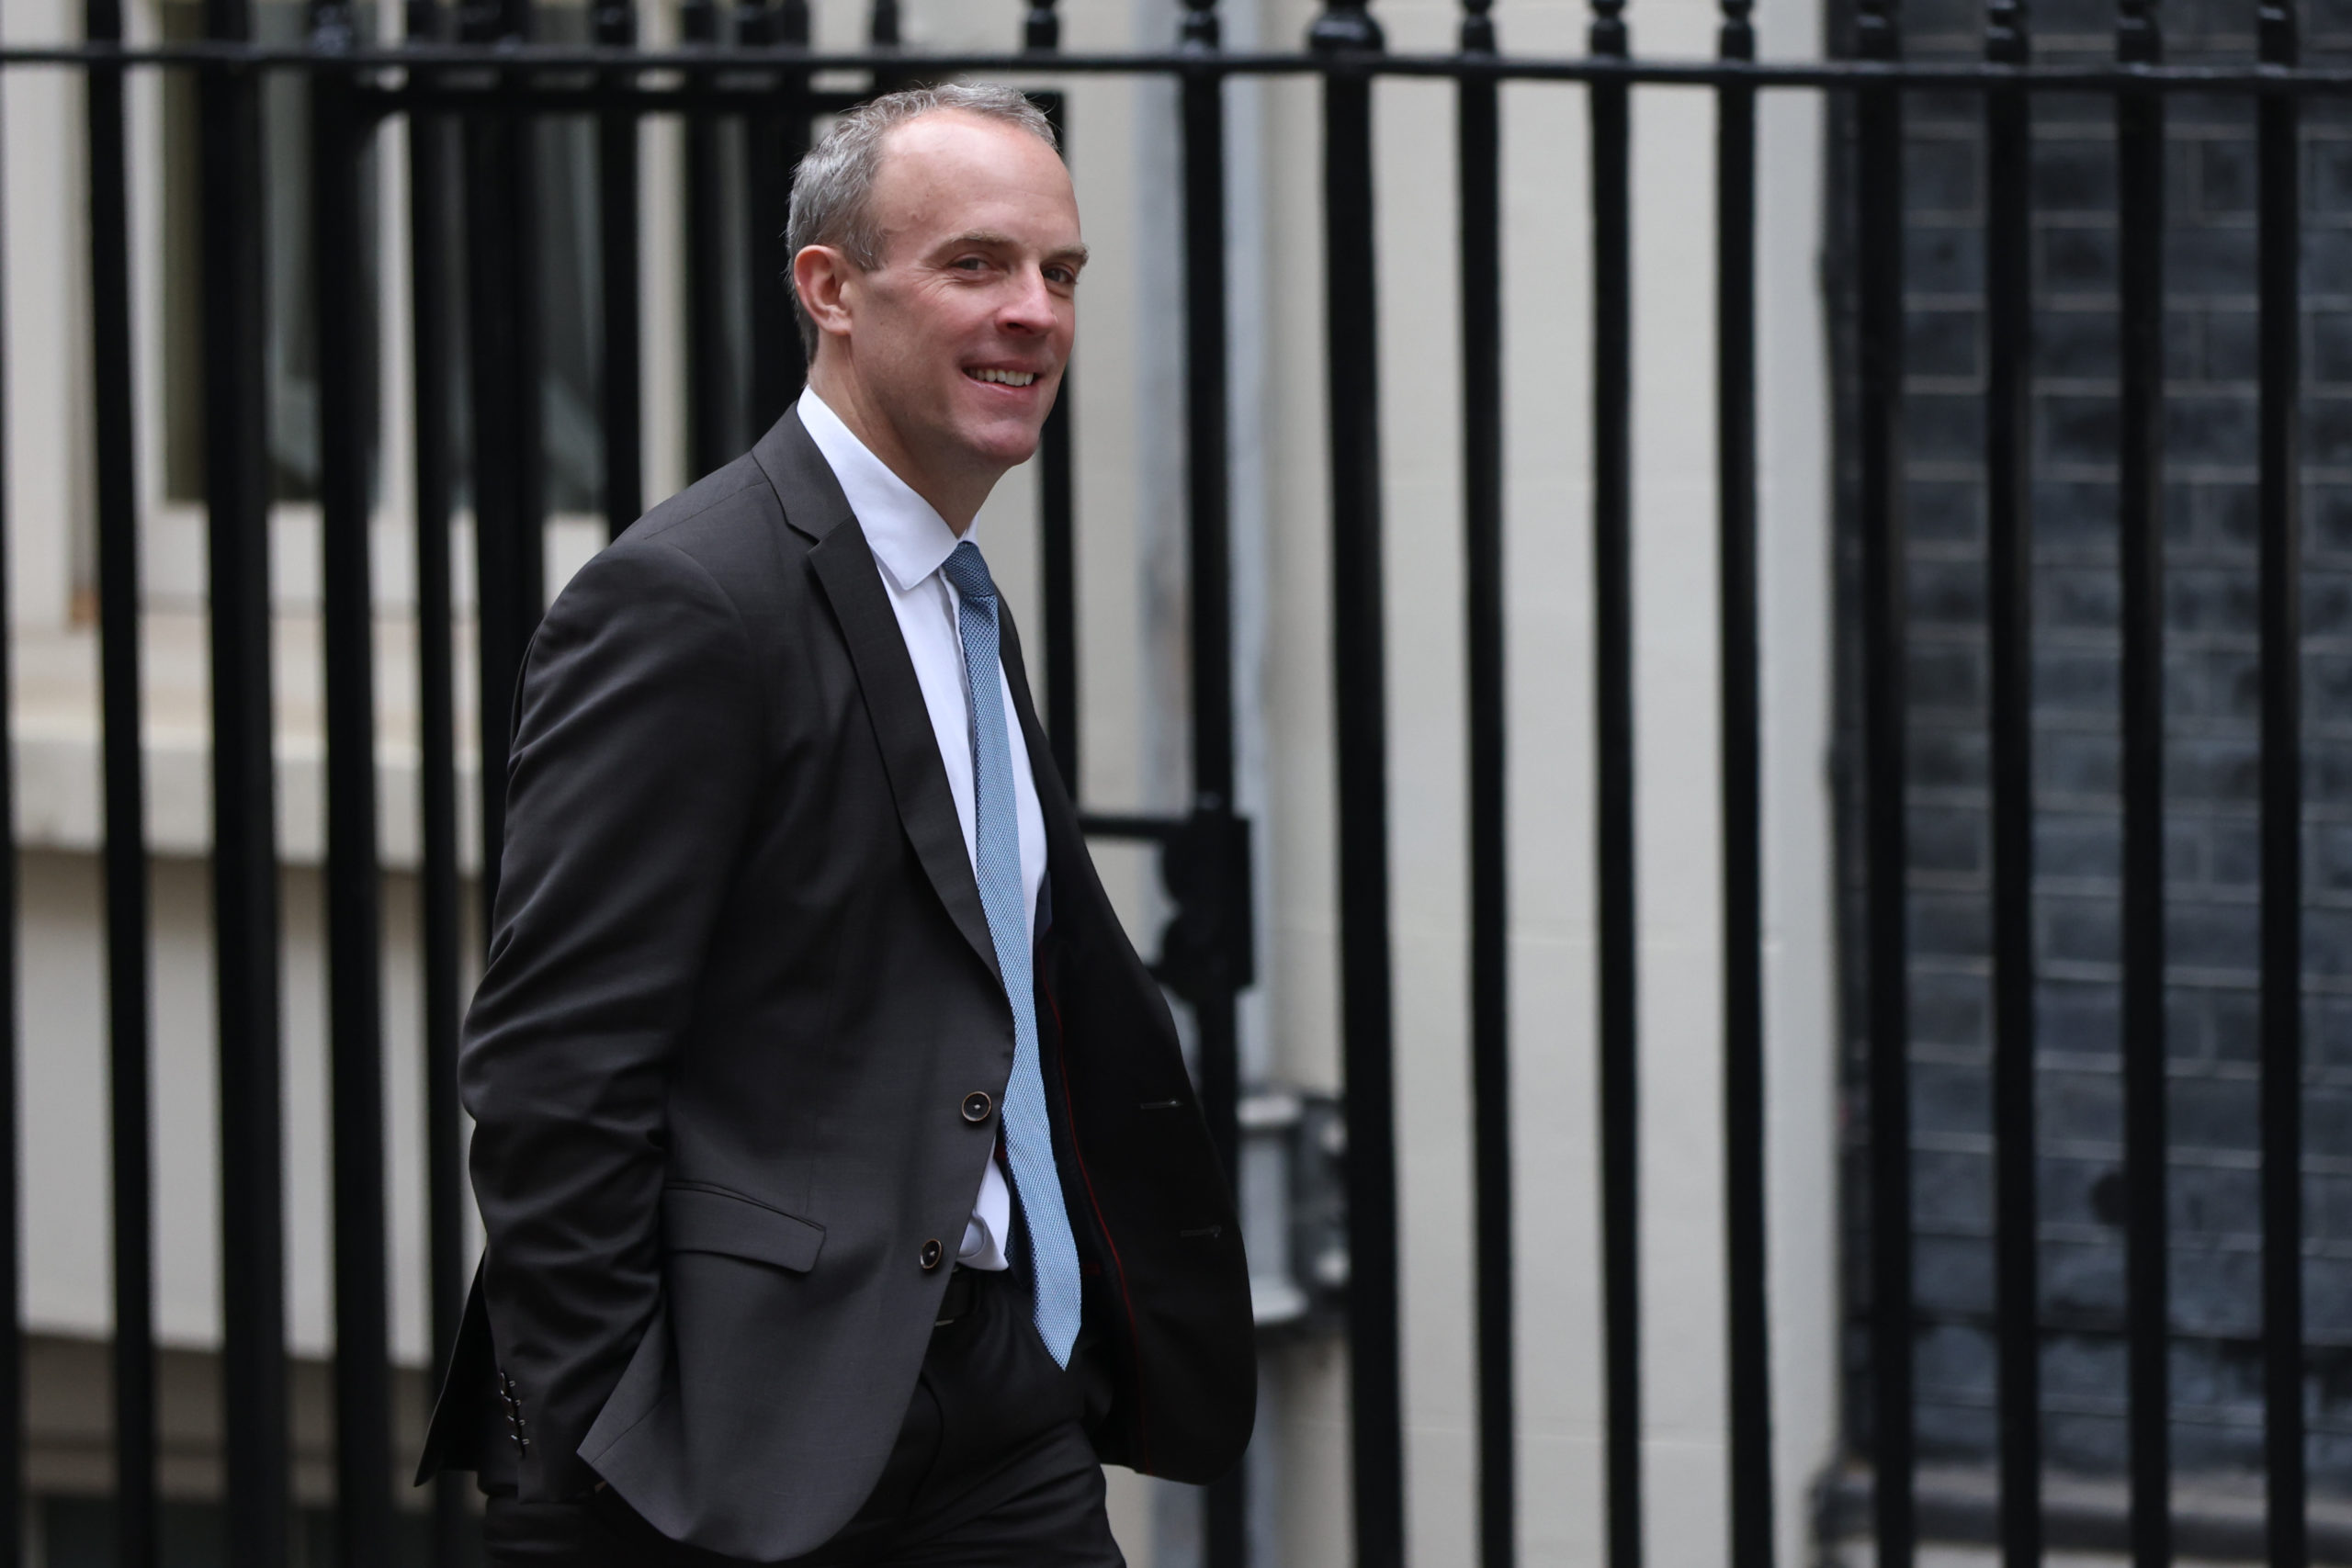 LONDON, ENGLAND - FEBRUARY 27: Dominic Raab, Deputy Prime Minister and Secretary of State for Justice, arrives at Downing Street on the day that Britain's Prime Minster Rishi Sunak met with European Commission chief Ursula von der Leyen on February 27, 2023 in London, England. (Photo by Hollie Adams/Getty Images)